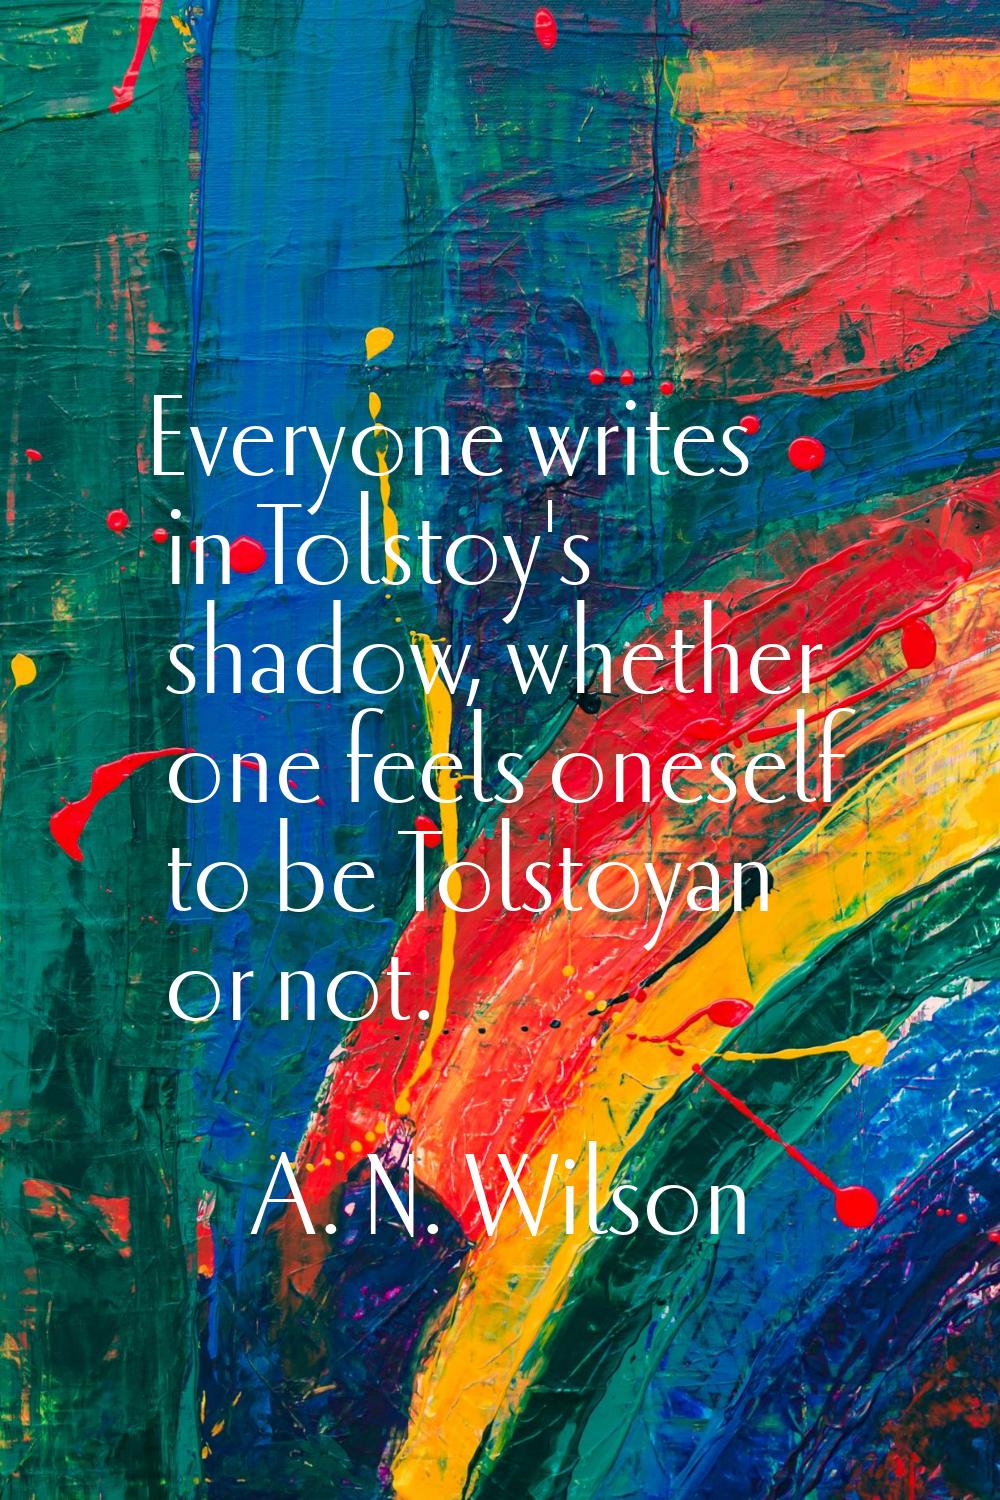 Everyone writes in Tolstoy's shadow, whether one feels oneself to be Tolstoyan or not.